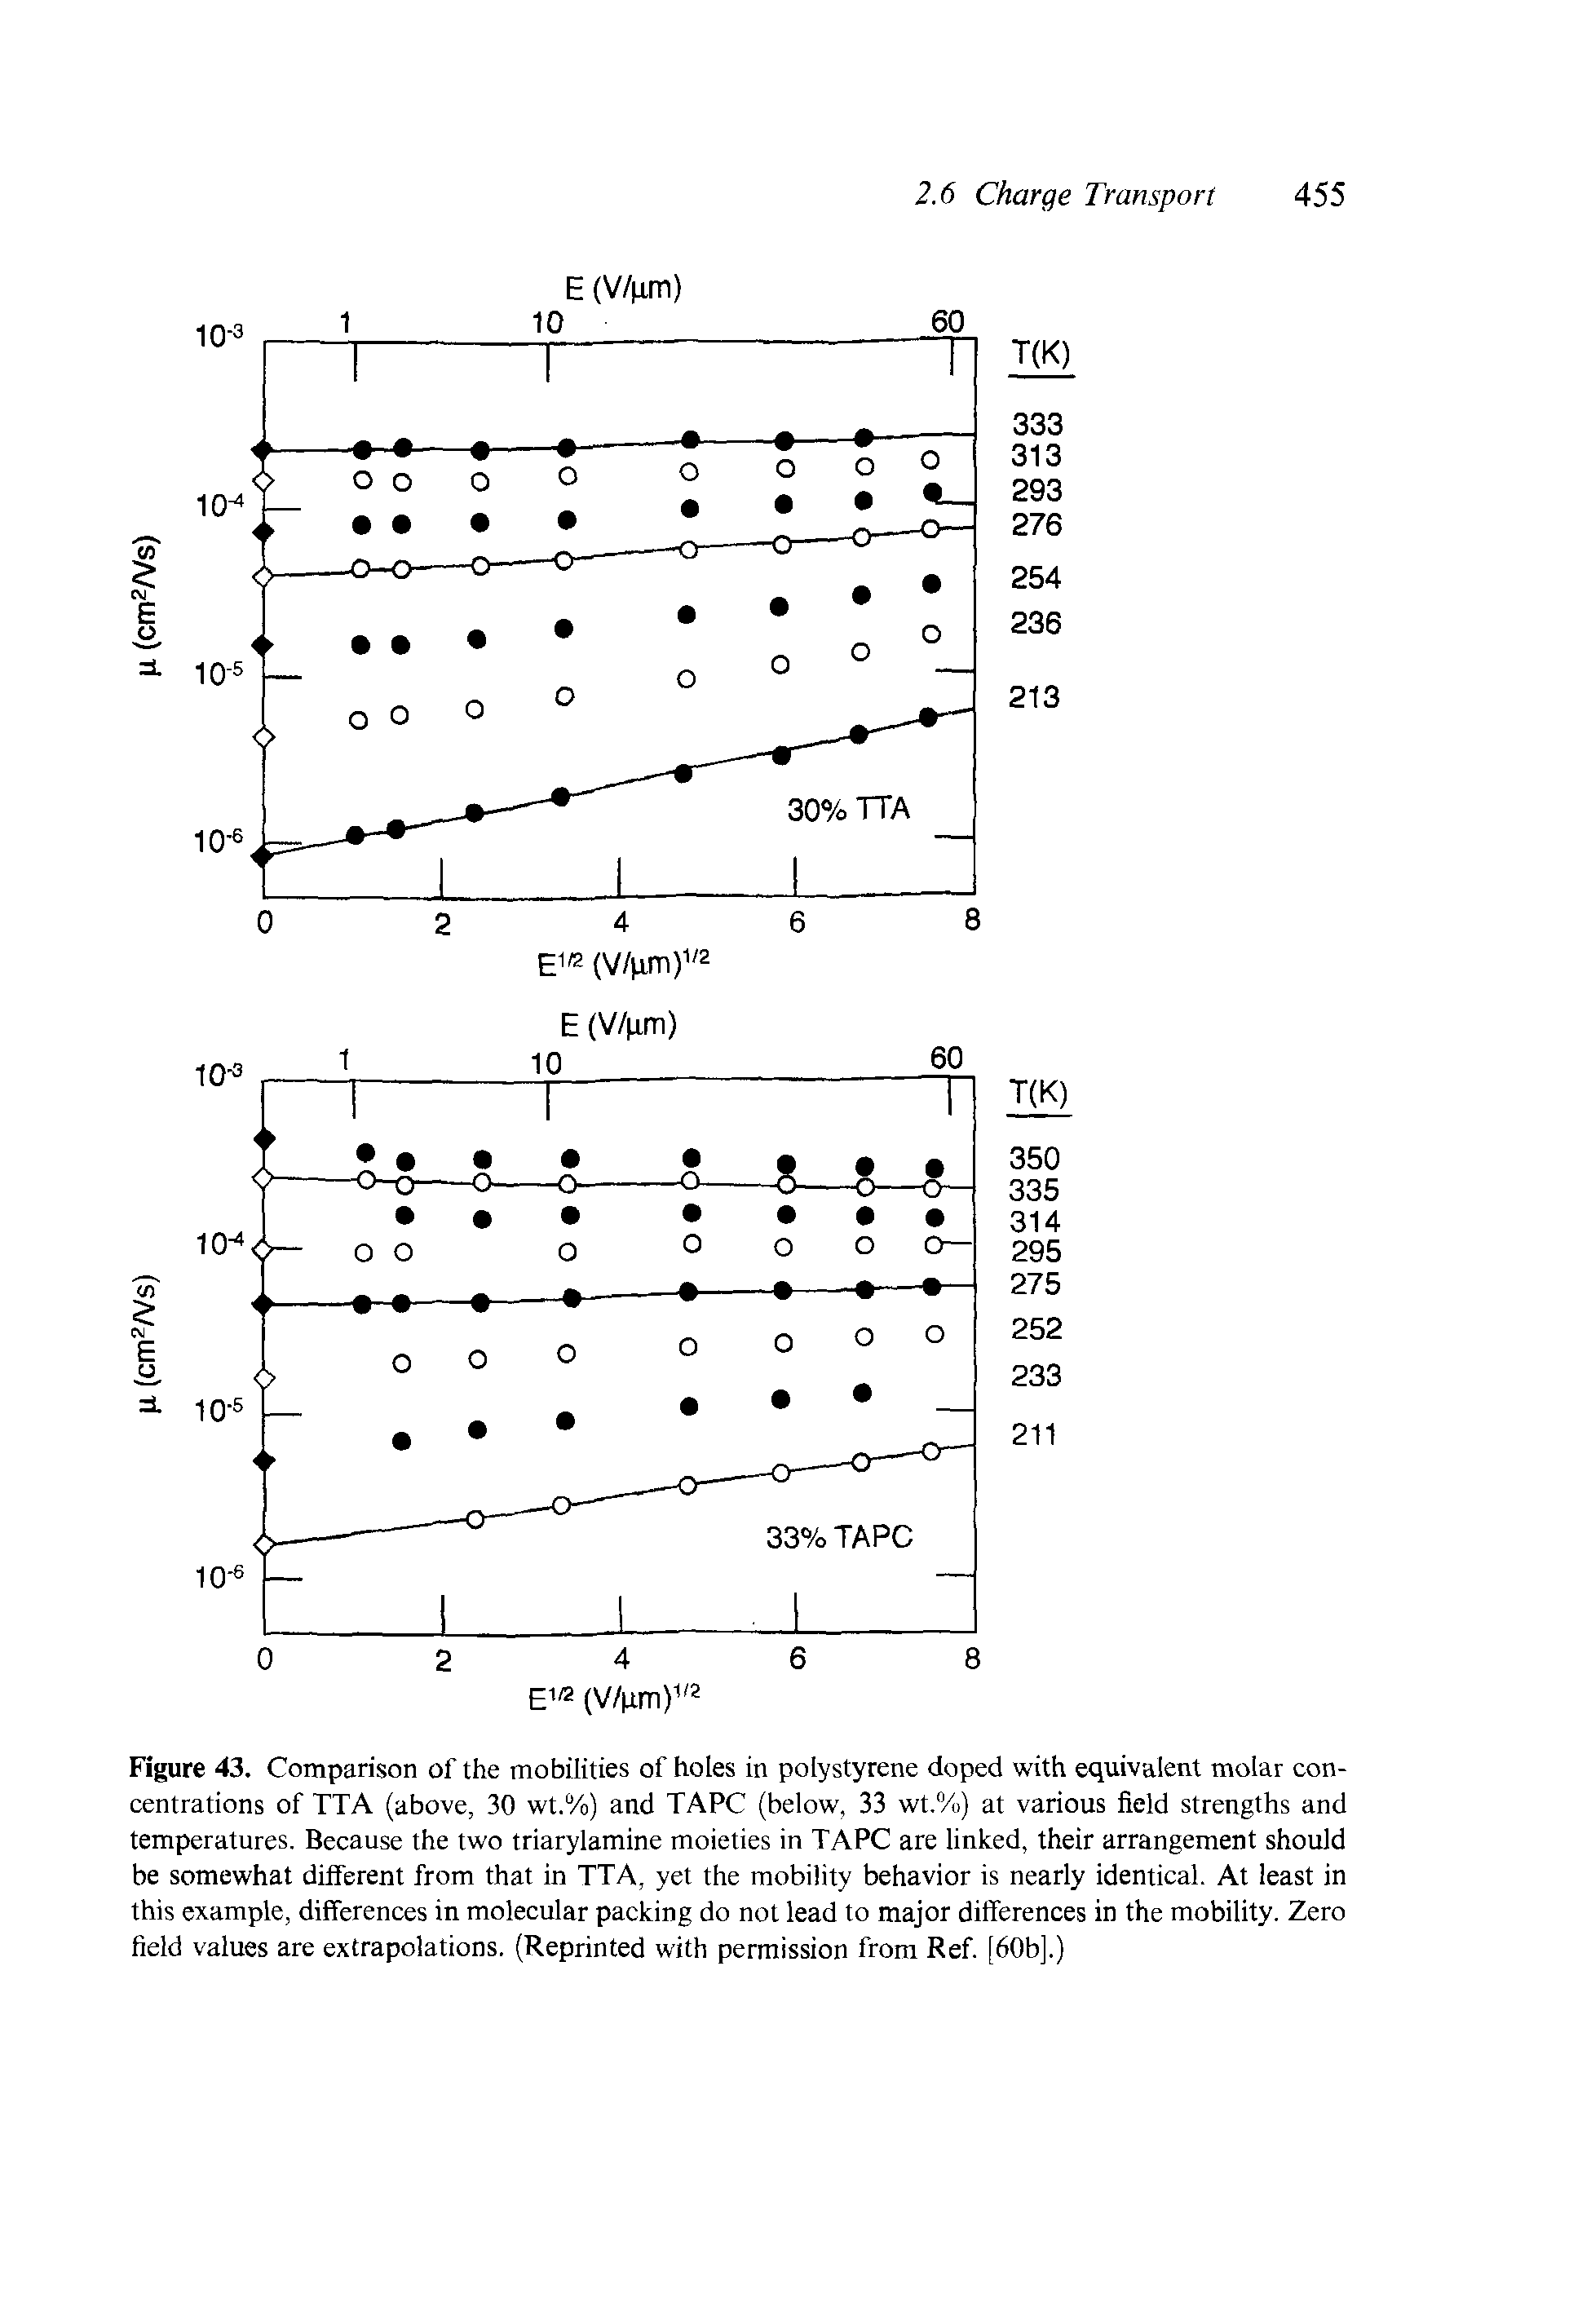 Figure 43. Comparison of the mobilities of holes in polystyrene doped with equivalent molar concentrations of TTA (above, 30 wt.%) and TAPC (below, 33 wt,%) at various field strengths and temperatures. Because the two triarylamine moieties in TAPC are linked, their arrangement should be somewhat different from that in TTA, yet the mobility behavior is nearly identical. At least in this example, differences in molecular packing do not lead to major differences in the mobility. Zero field values are extrapolations. (Reprinted with permission from Ref. [60b].)...